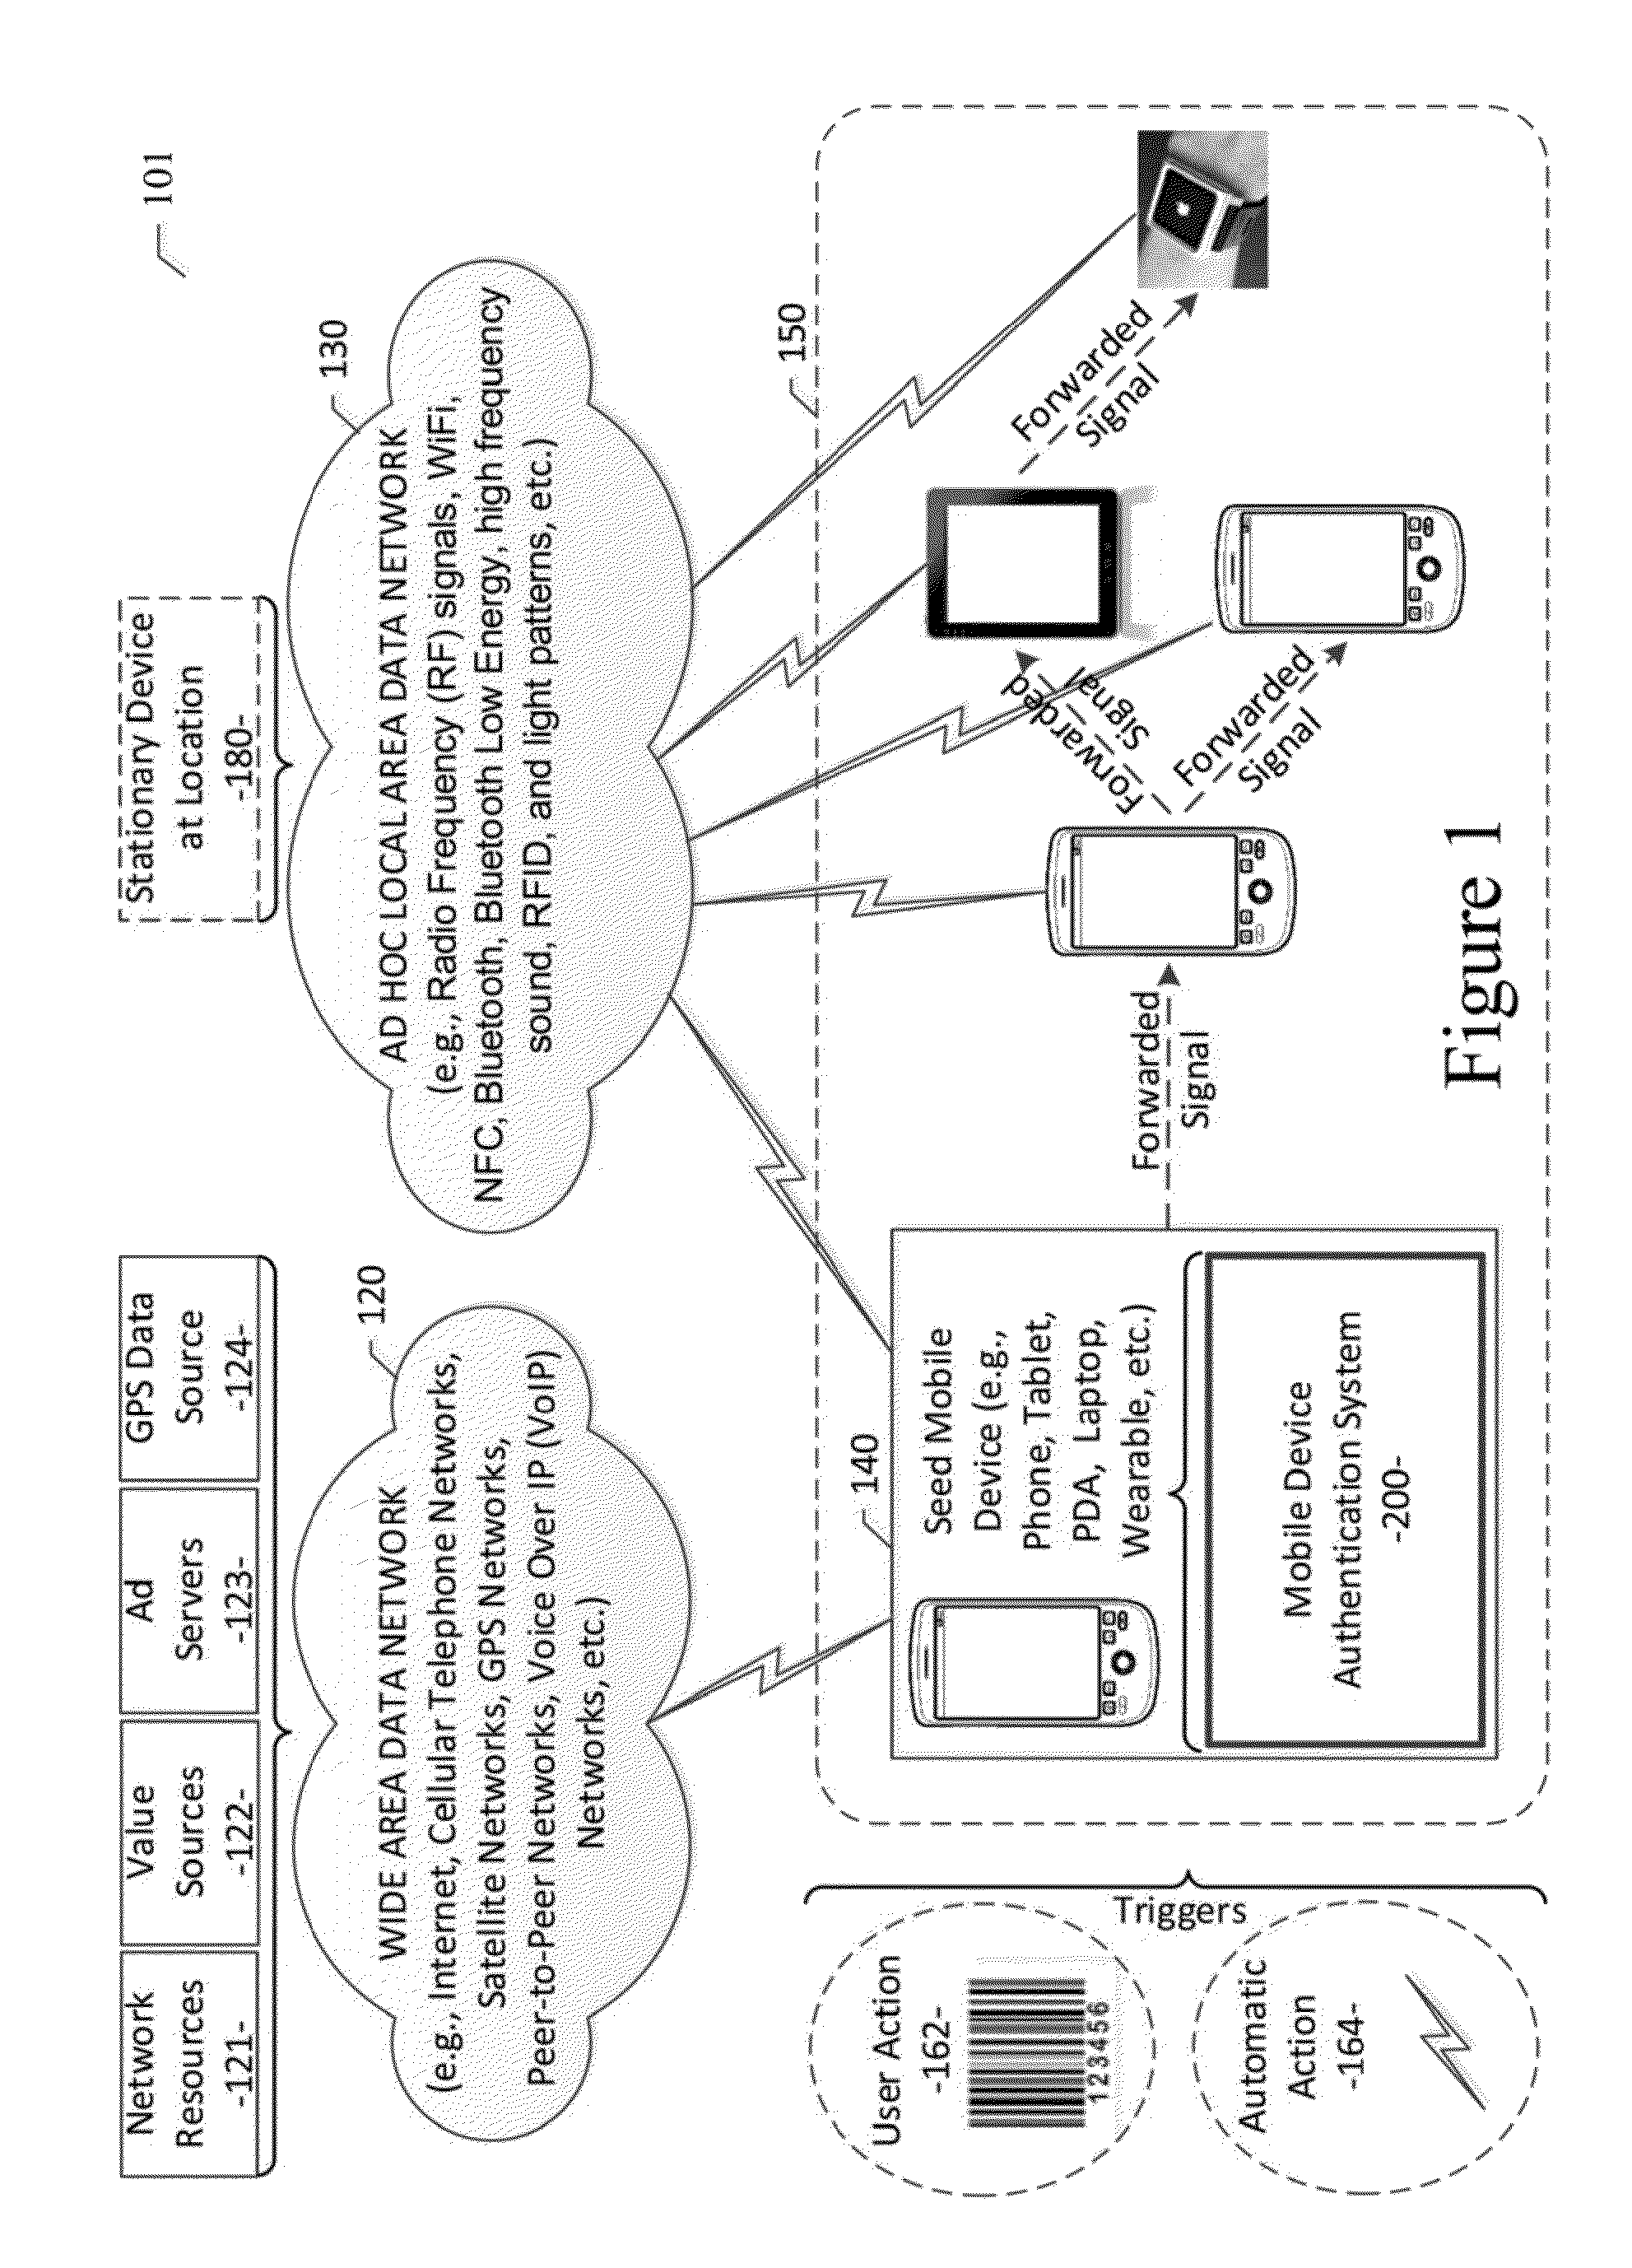 System and method for broadcasting decoy signals and an authentic signal in a location of interest